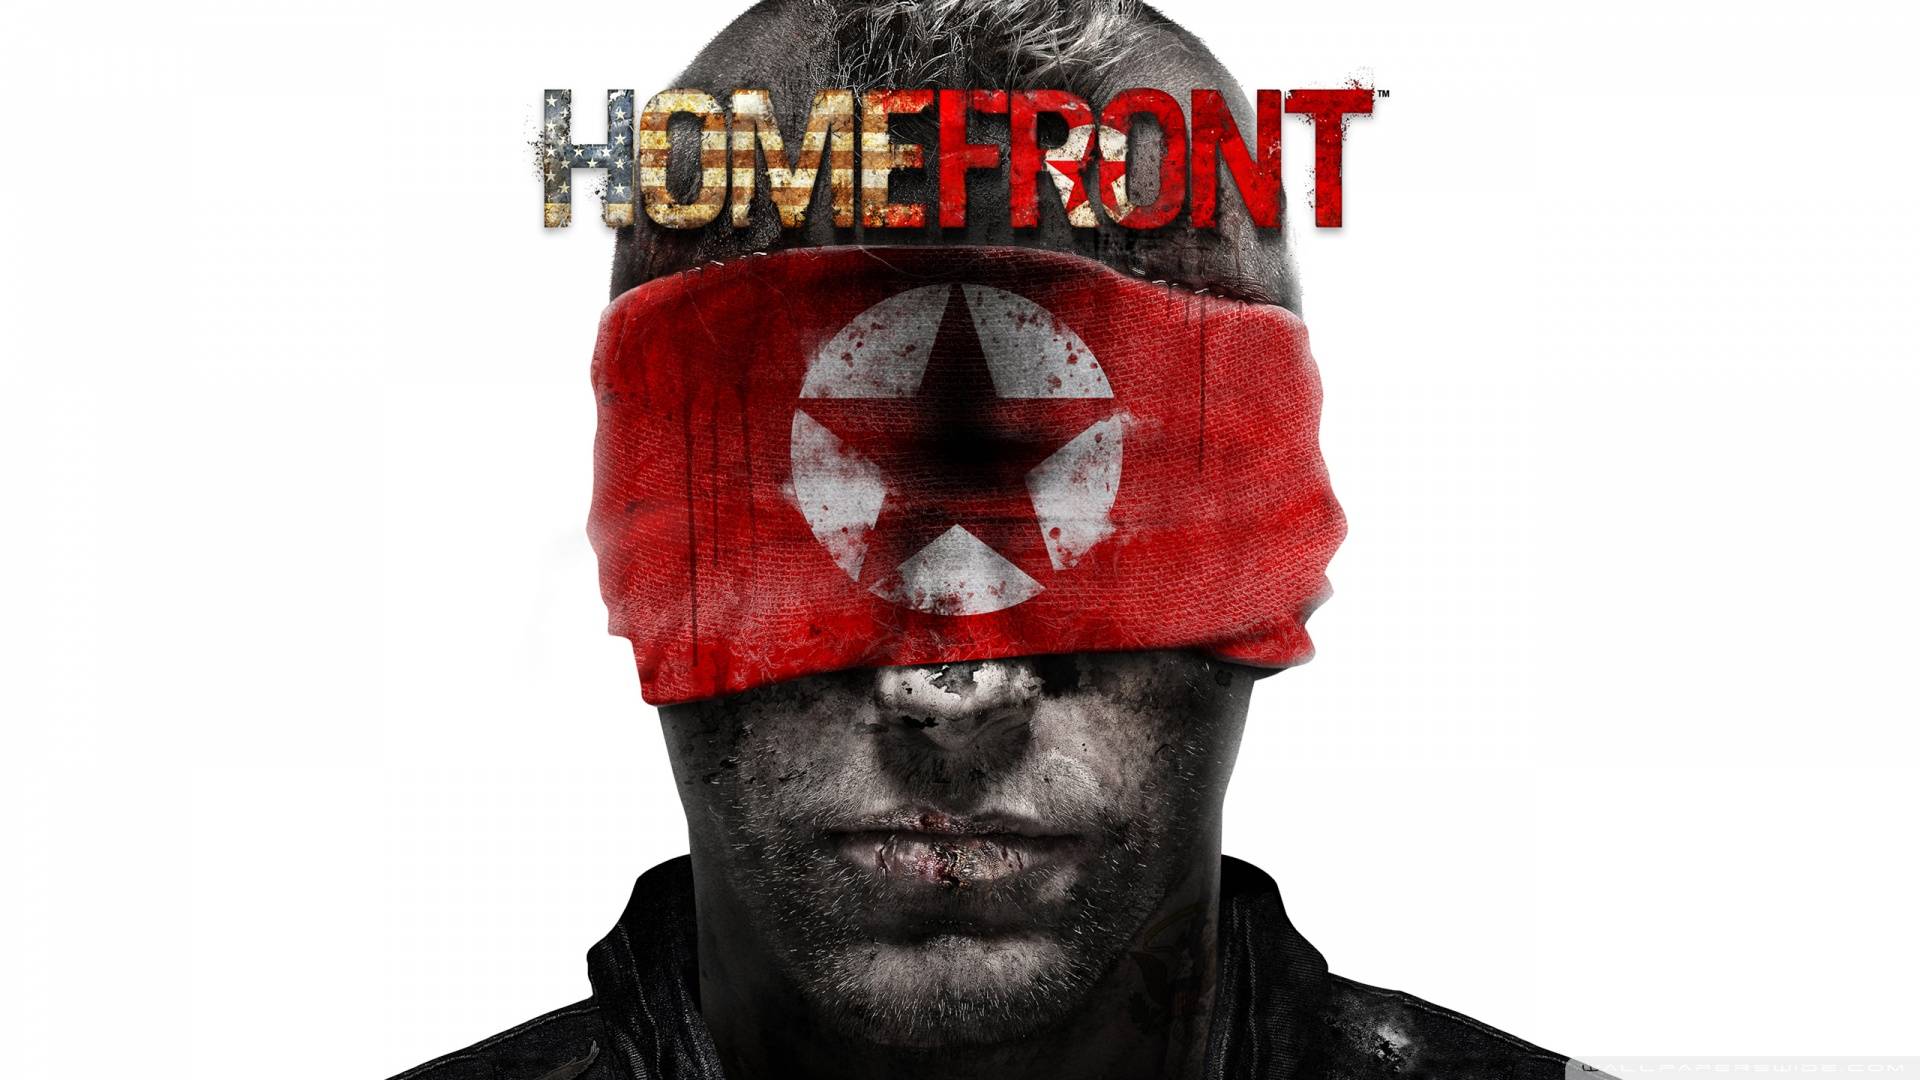 Homefront Wallpapers in full 1080P HD GamingBoltcom Video Game